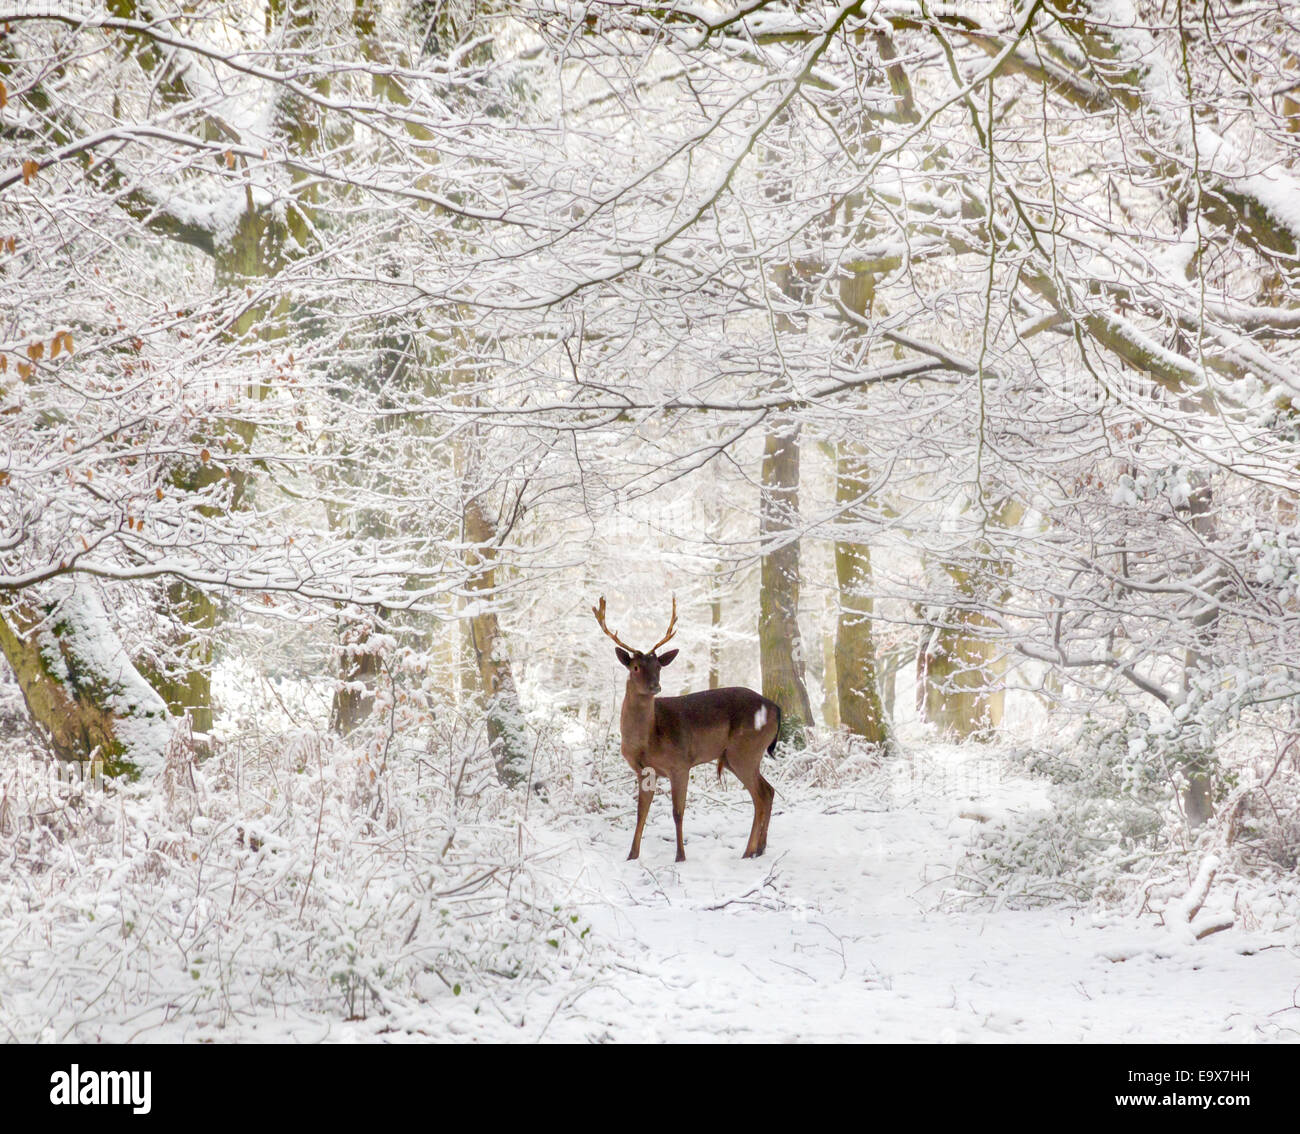 Male Roe Deer stag (Capreolus capreolus) in a snowy winter forest Stock Photo